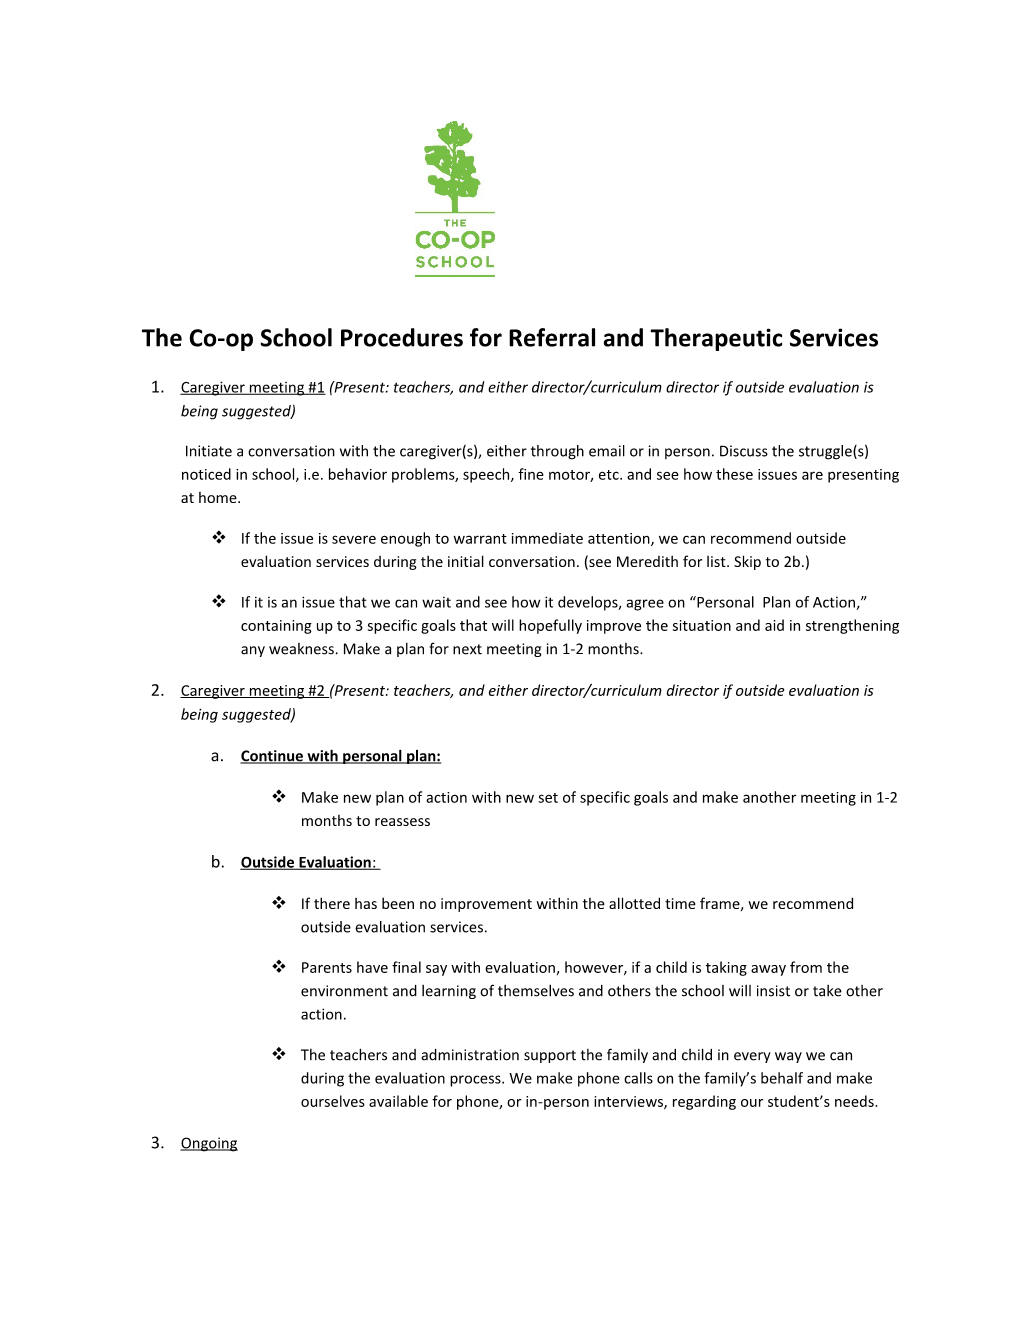 The Co-Op School Procedures for Referral and Therapeutic Services